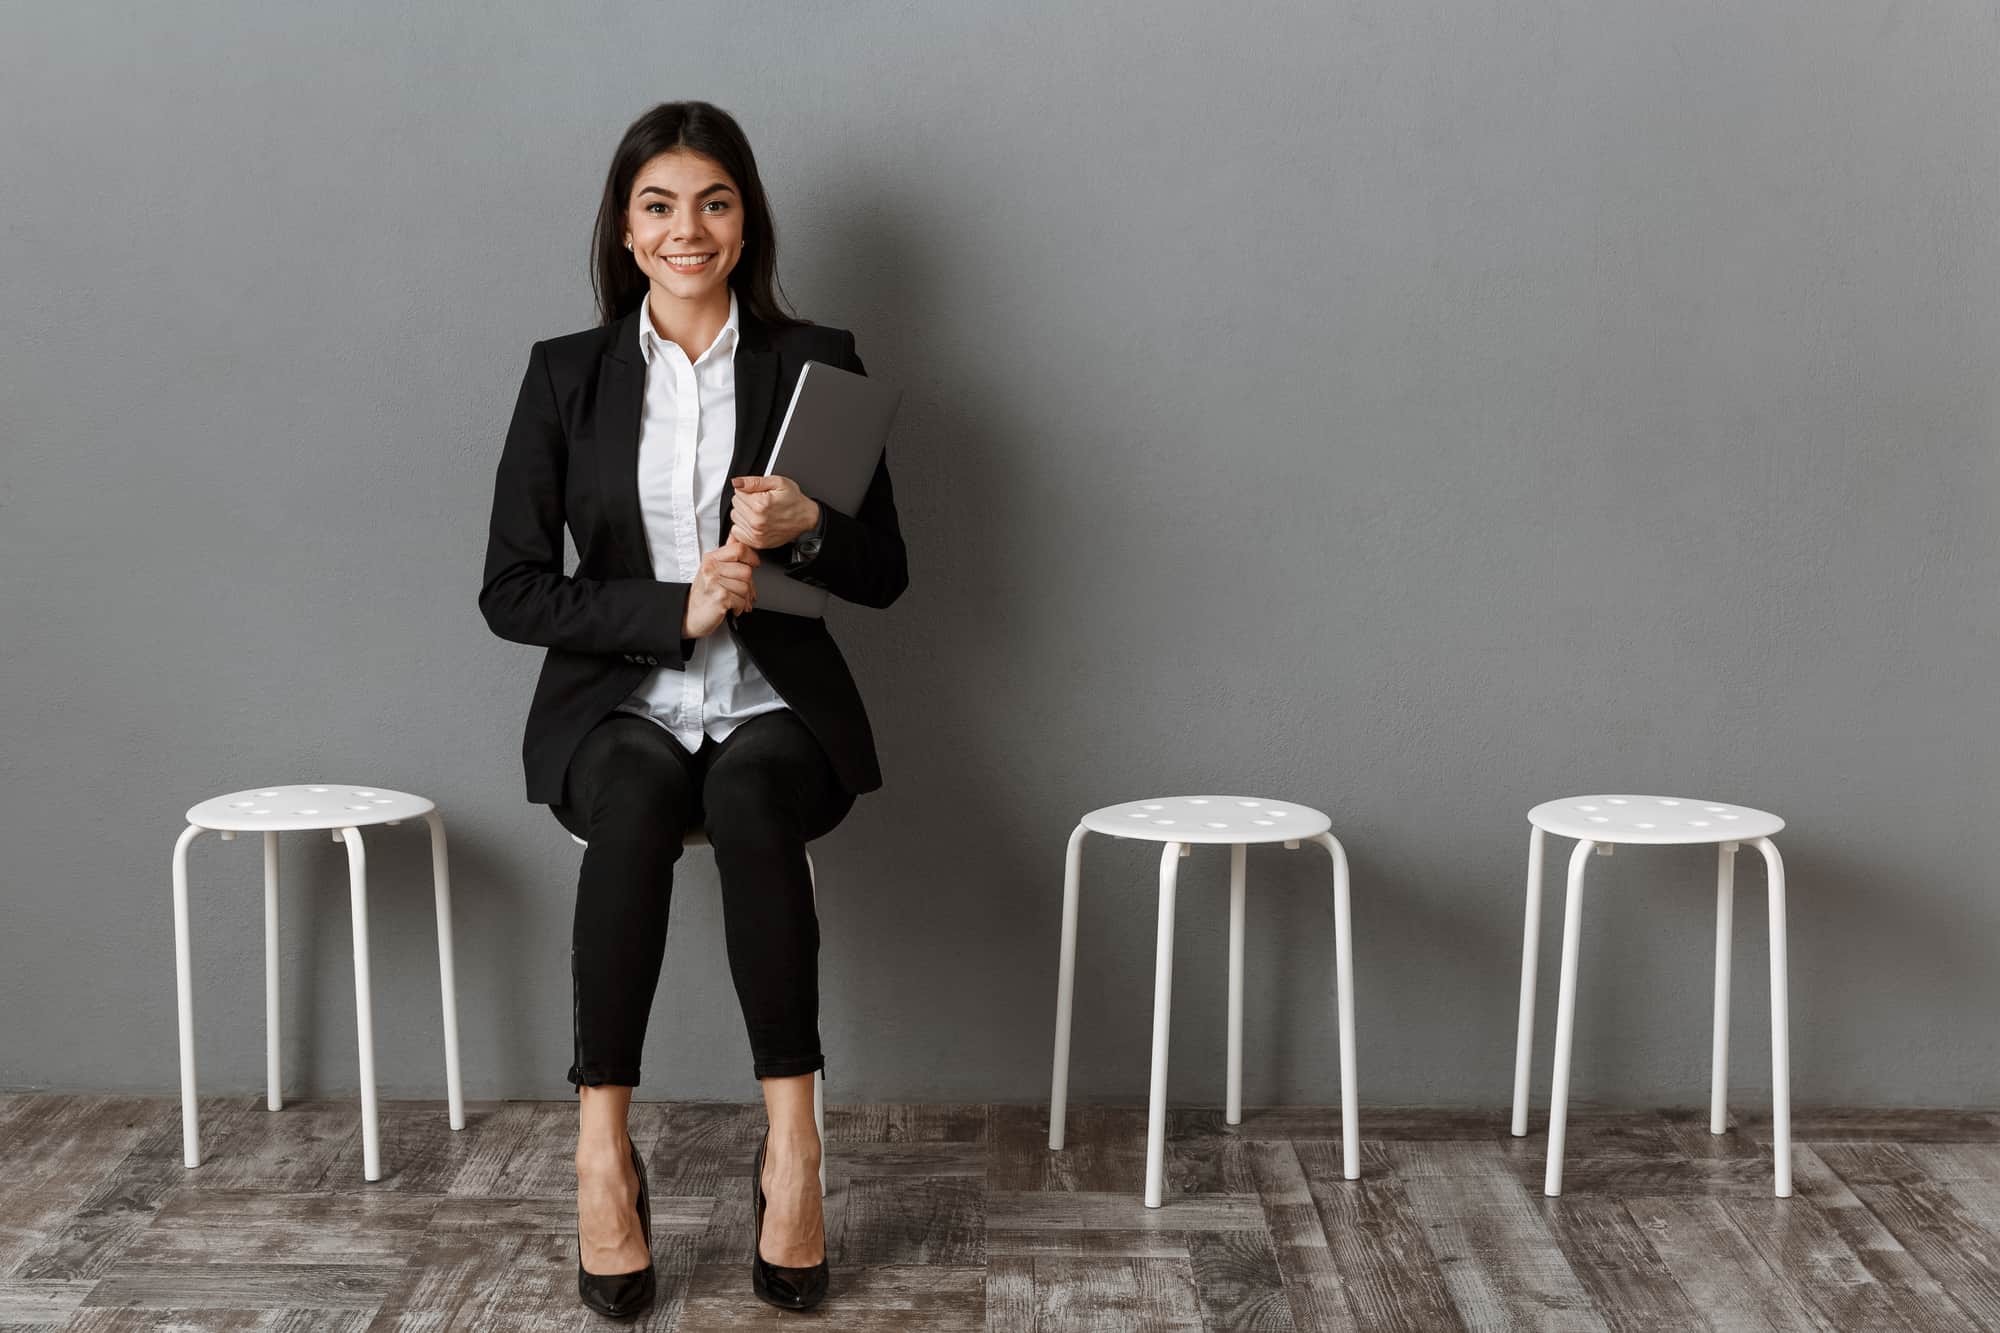 Dress to impress: essential tips to keep in mind for a job interview